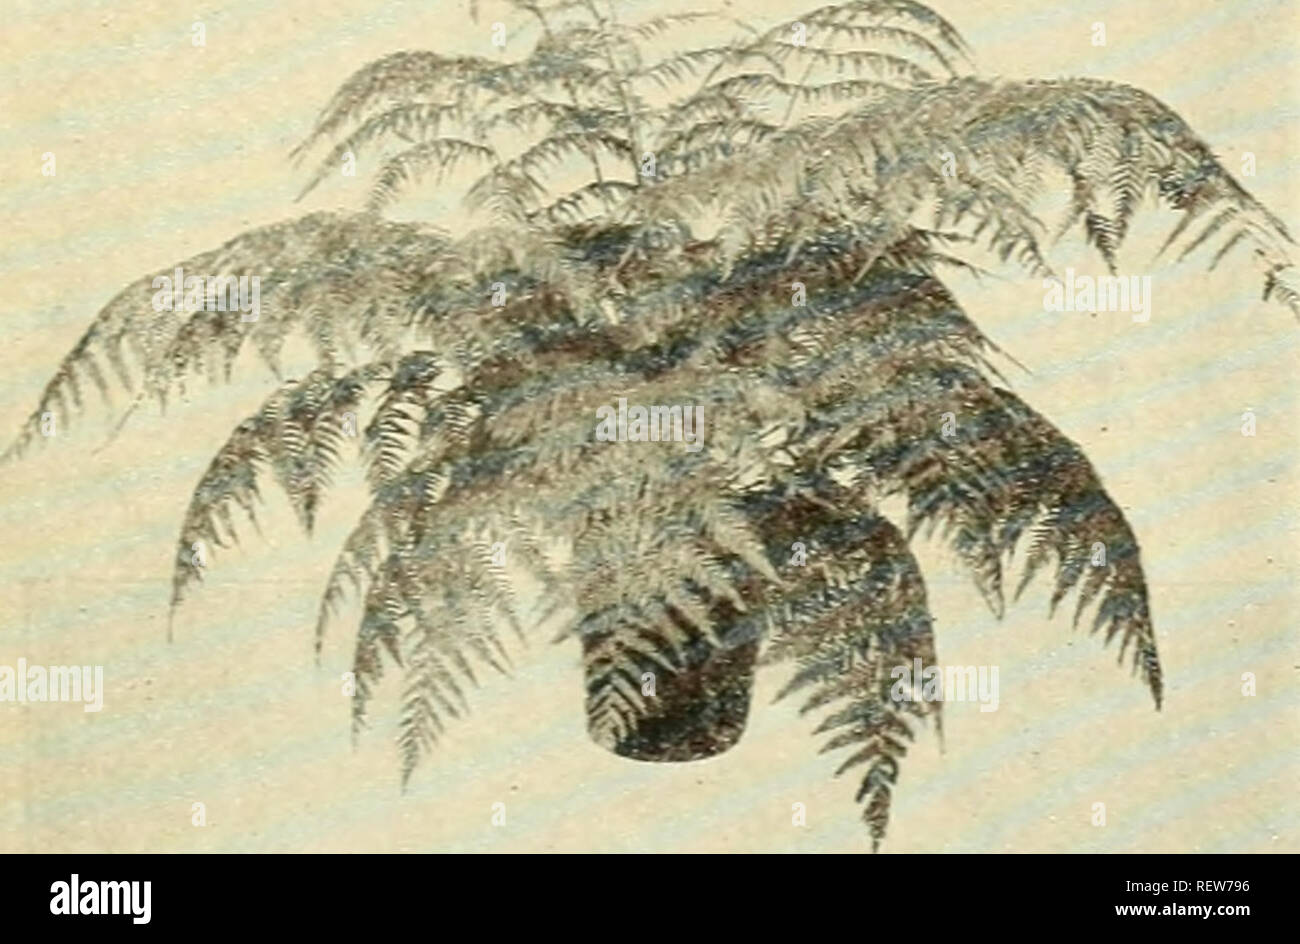 . Dreer's wholesale price list for florists. Bulbs (Plants) Catalogs; Flowers Seeds Catalogs; Nurseries (Horticulture) Catalogs; Gardening Equipment and supplies Catalogs. Cibotium Schiedei Cibotium Schiedei—Mexican Tree Fern One of the most desirable and most valuable Ferns for room decoration. Grows to considerable size and is most attractive with its lovely large fronds of a beau- tiful light green color. A beautiful lot of strong specimen plants. Each Splendid plants in 10-inch tubs $6 00 Cyrtomium Rochfordianum compactum The Improved Holly Fern Next to the Boston Ferns this Holly Fern is  Stock Photo